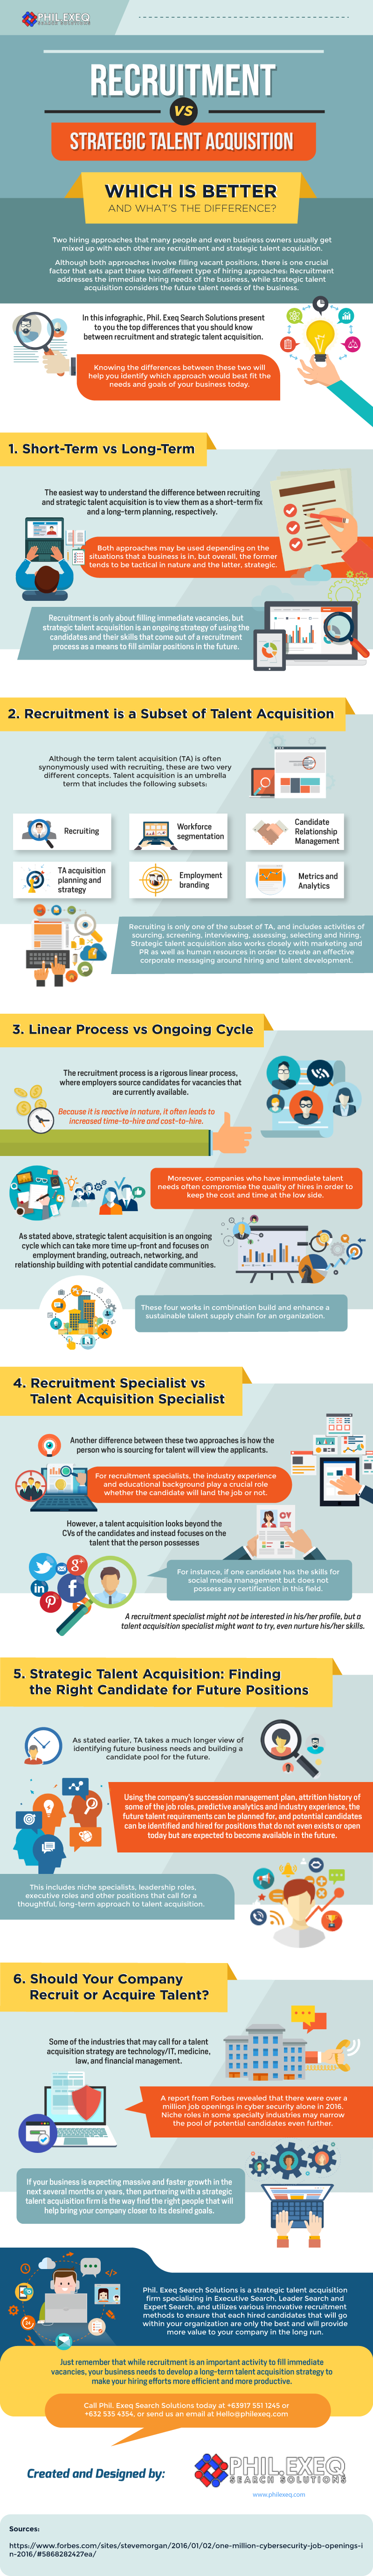 The Difference Between Strategic Talent Acquisition And Recruitment - Infographic